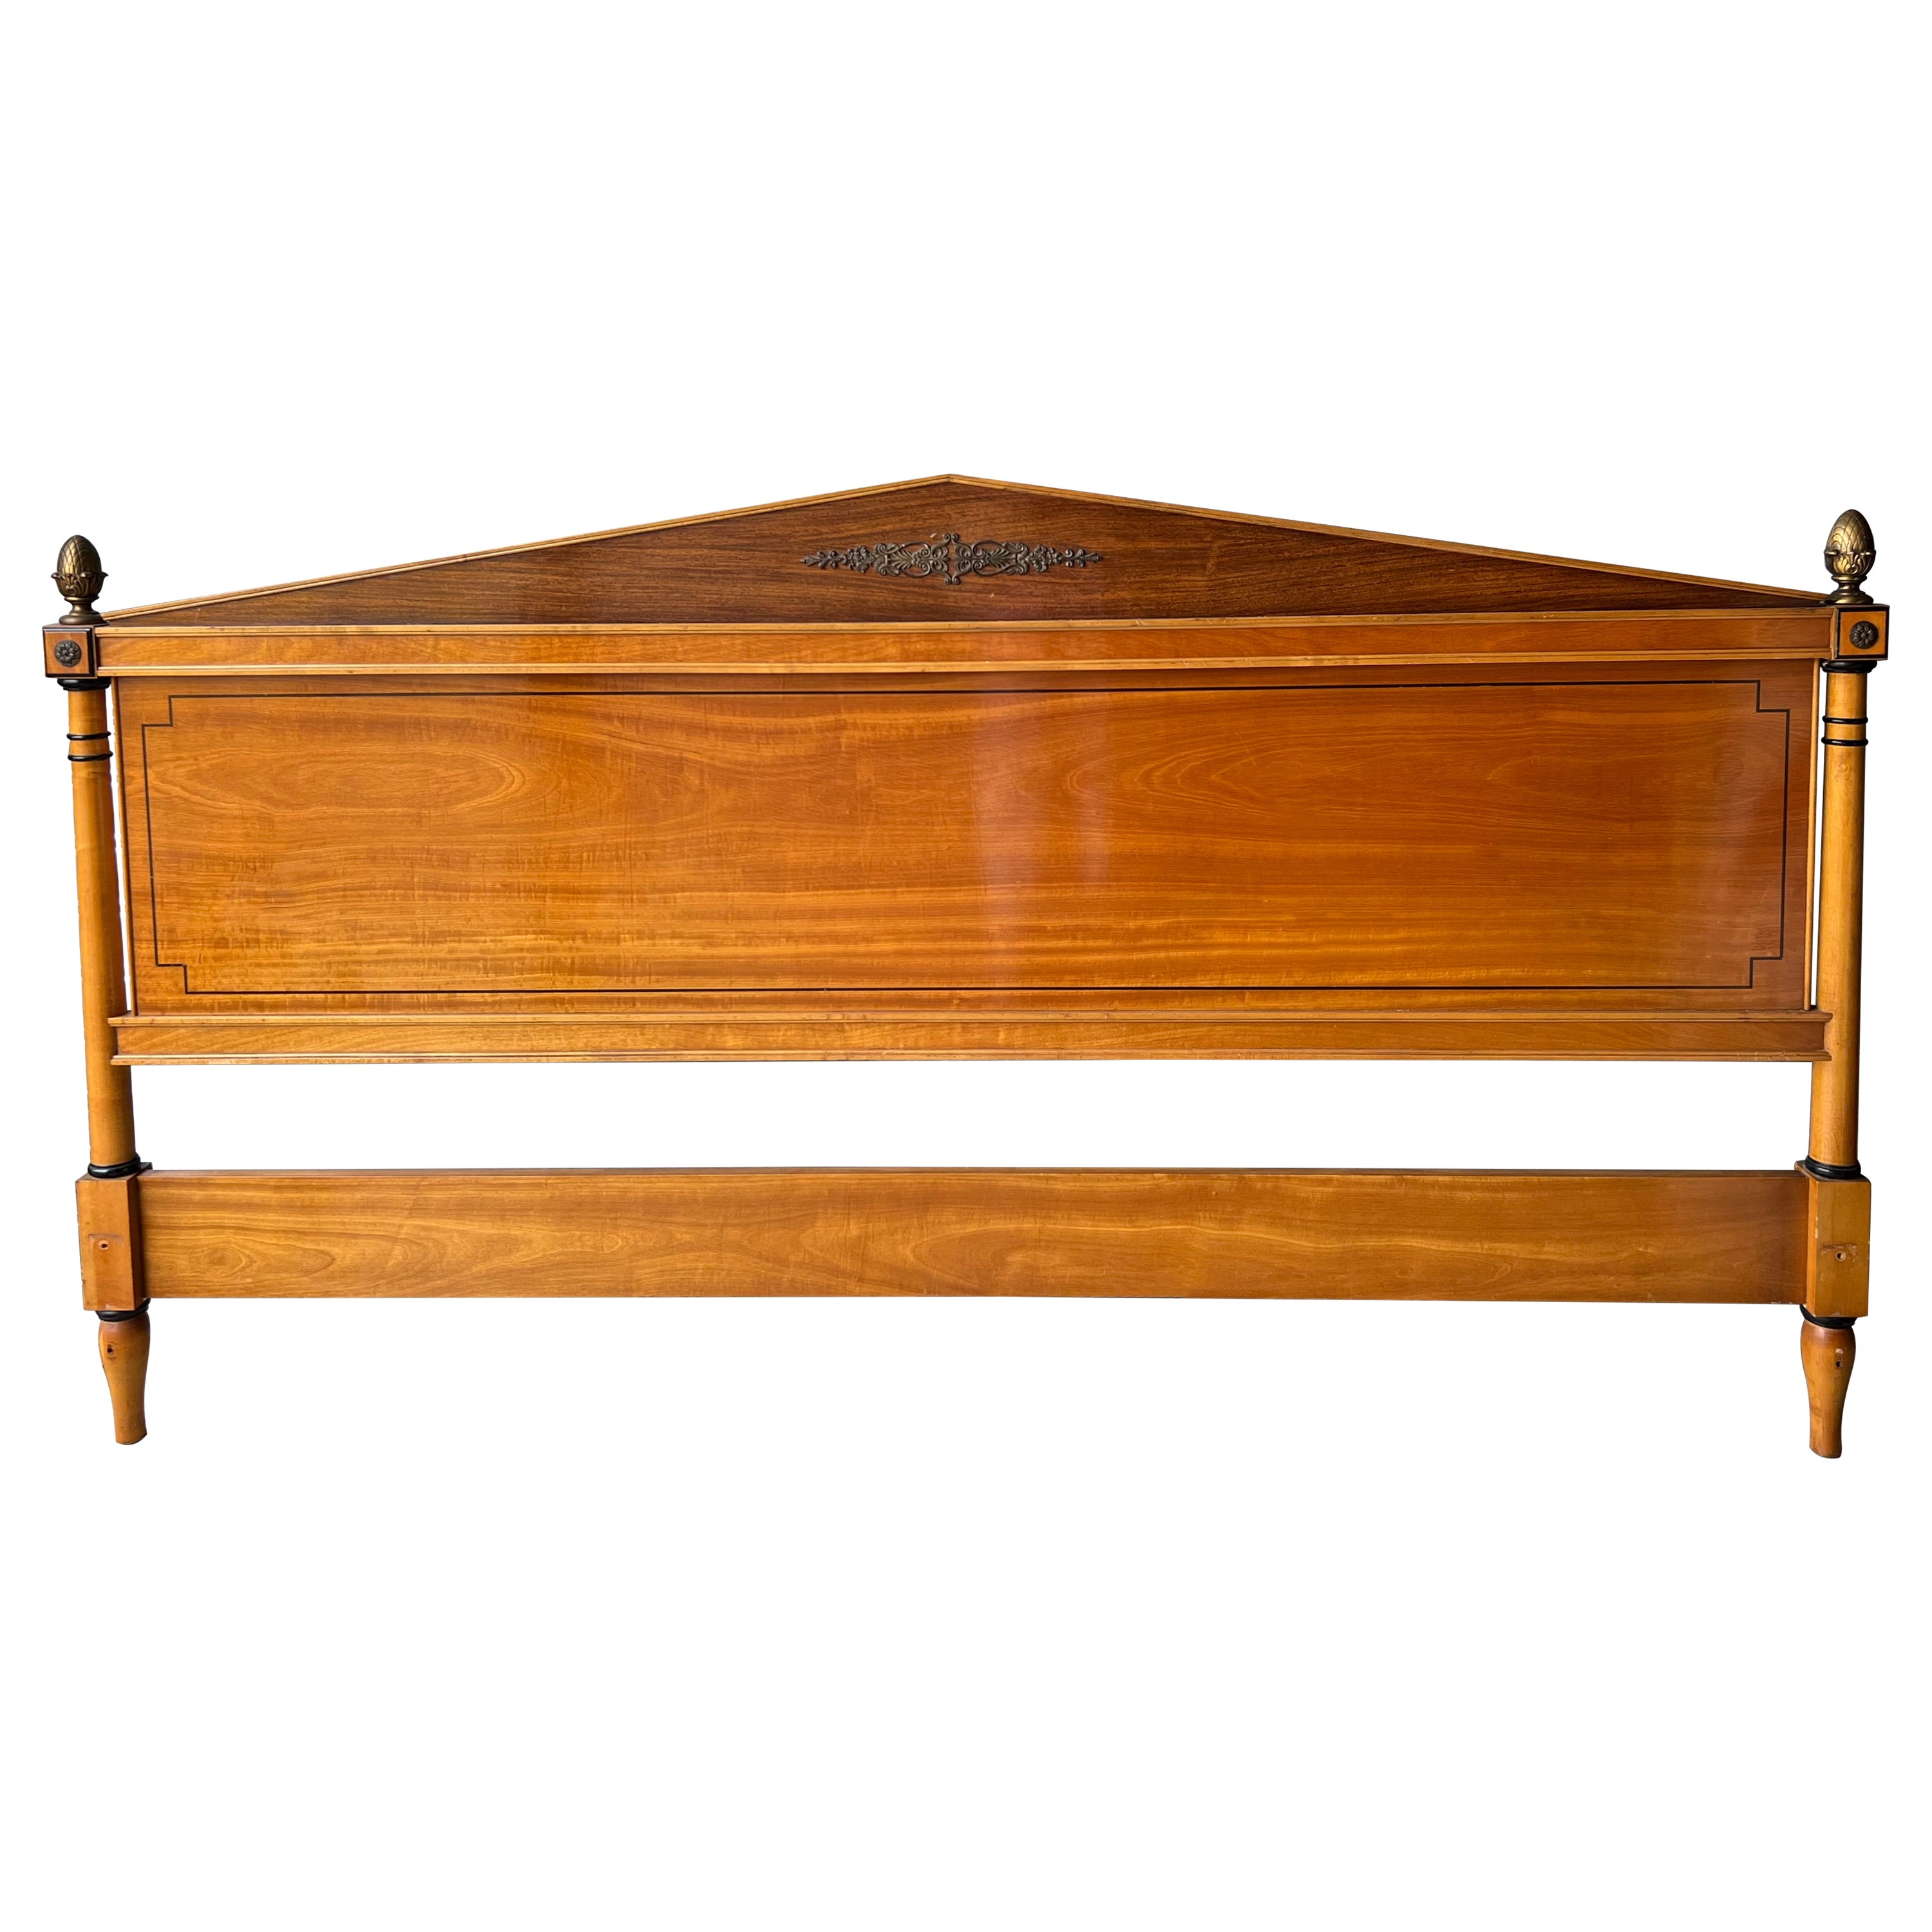 1940s Maple French Regency Style Faux Bamboo Inspired King Size Headboard